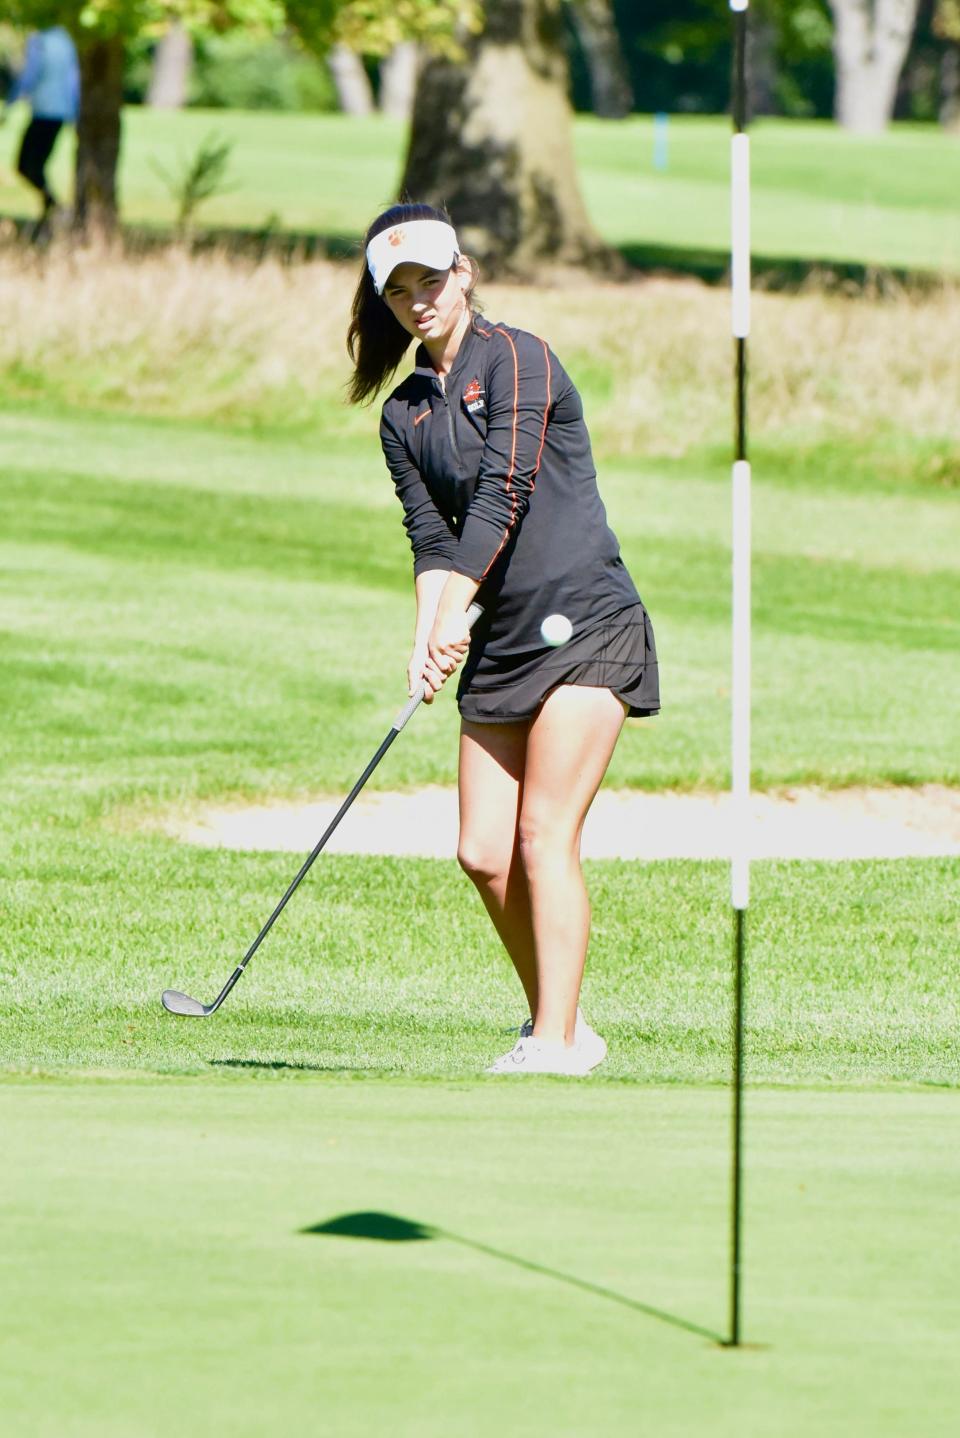 Maddy Martens shot 79 to tie two teammates for third place in the KLAA postseason golf tournament Friday at Kensington Metropark Golf Course.